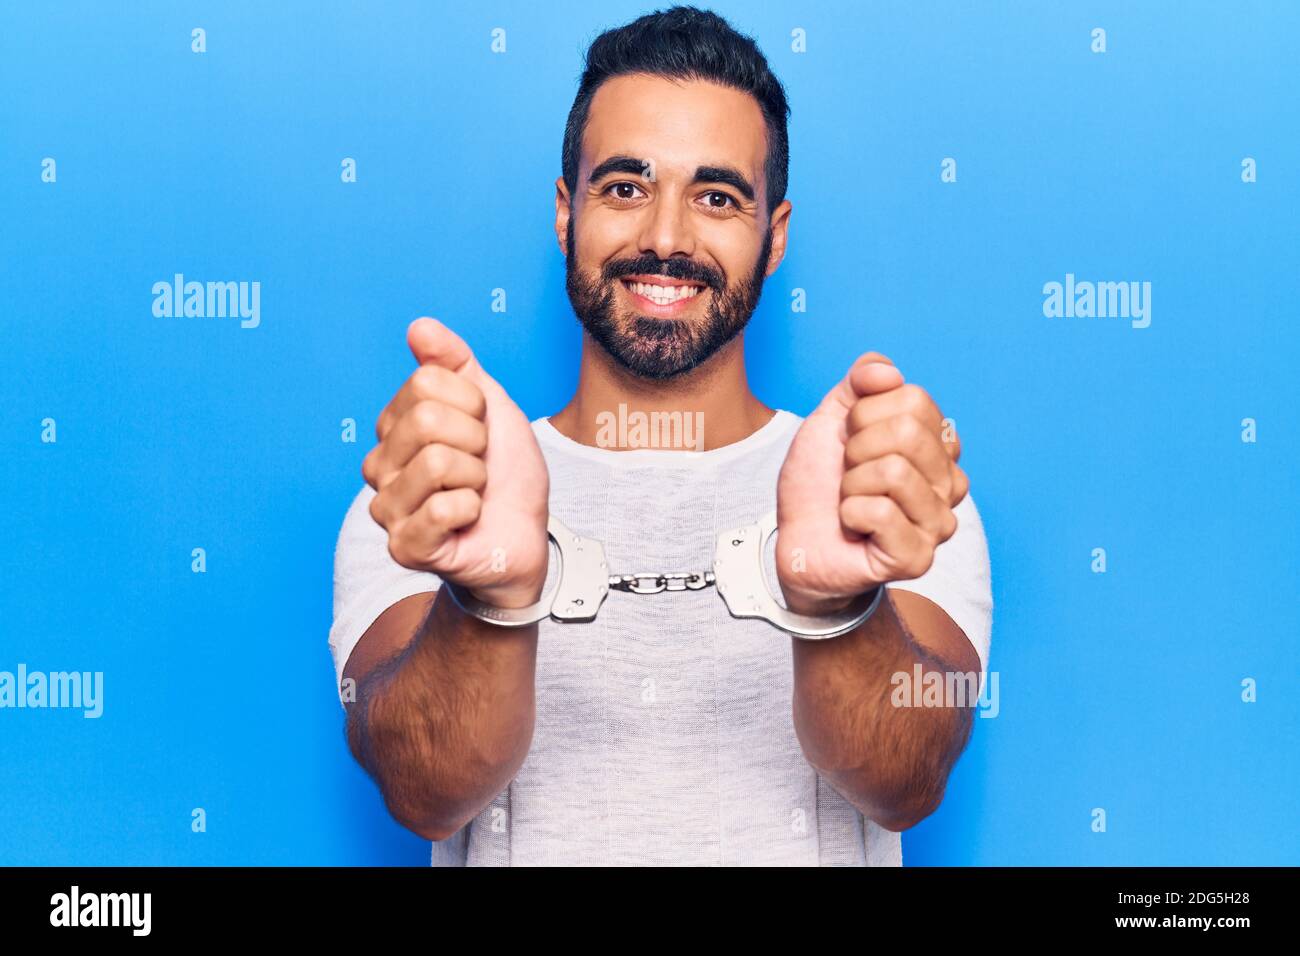 Young hispanic man wearing prisoner handcuffs looking positive and happy standing and smiling with a confident smile showing teeth Stock Photo